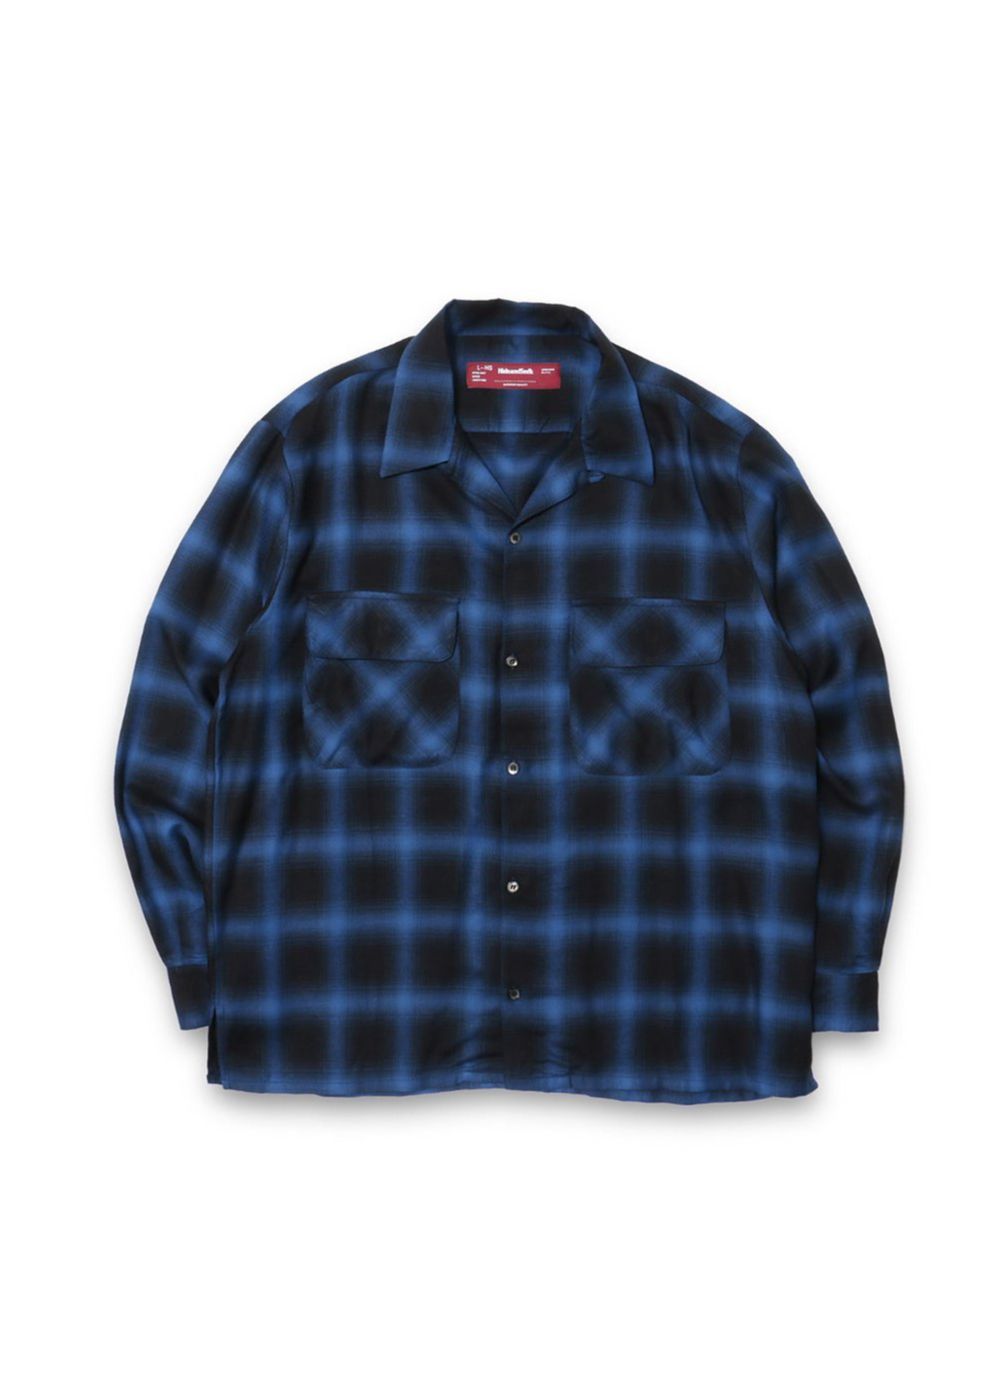 HIDE AND SEEK - OMBRE CHECK L/S SHIRT (BLUE) / オンブレチェック